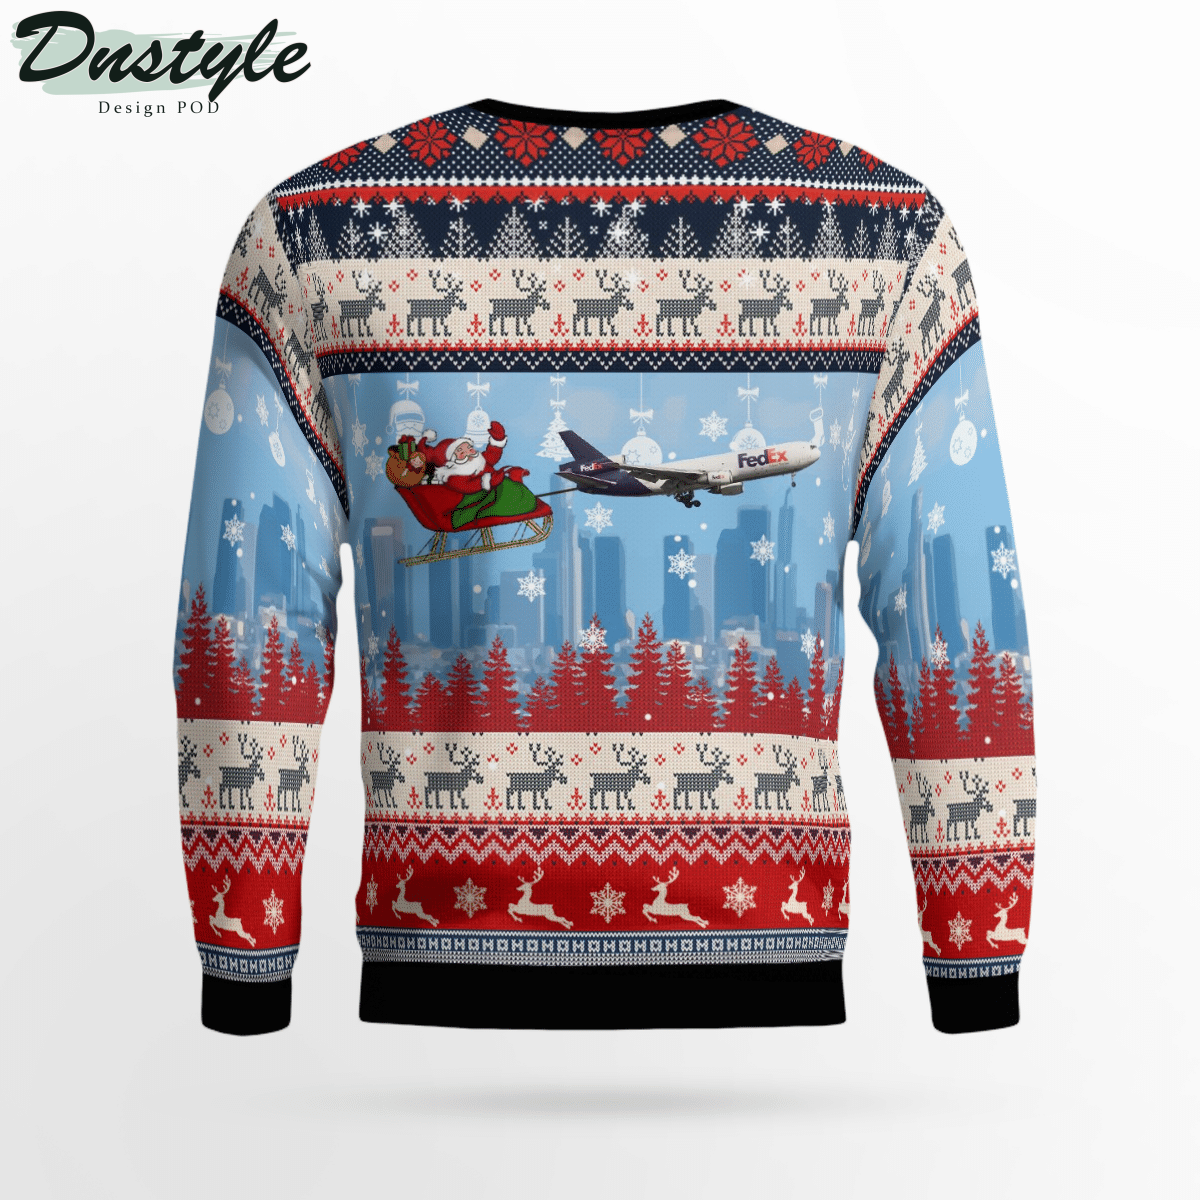 FedEx Express McDonnell Douglas MD-10-30F With Santa Over Memphis Ugly Christmas Sweater